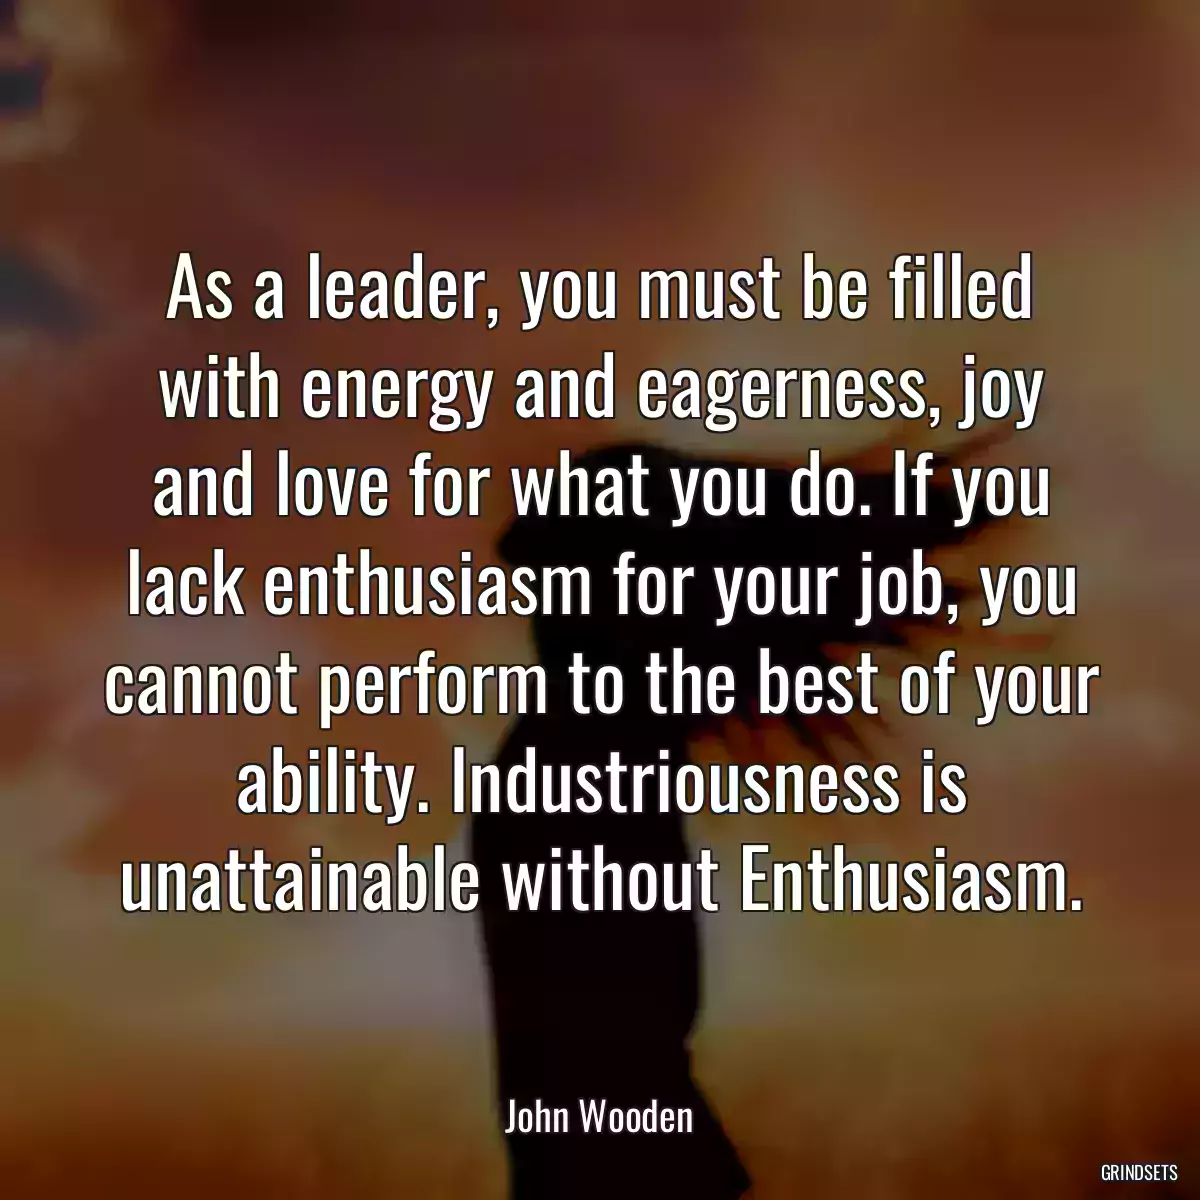 As a leader, you must be filled with energy and eagerness, joy and love for what you do. If you lack enthusiasm for your job, you cannot perform to the best of your ability. Industriousness is unattainable without Enthusiasm.